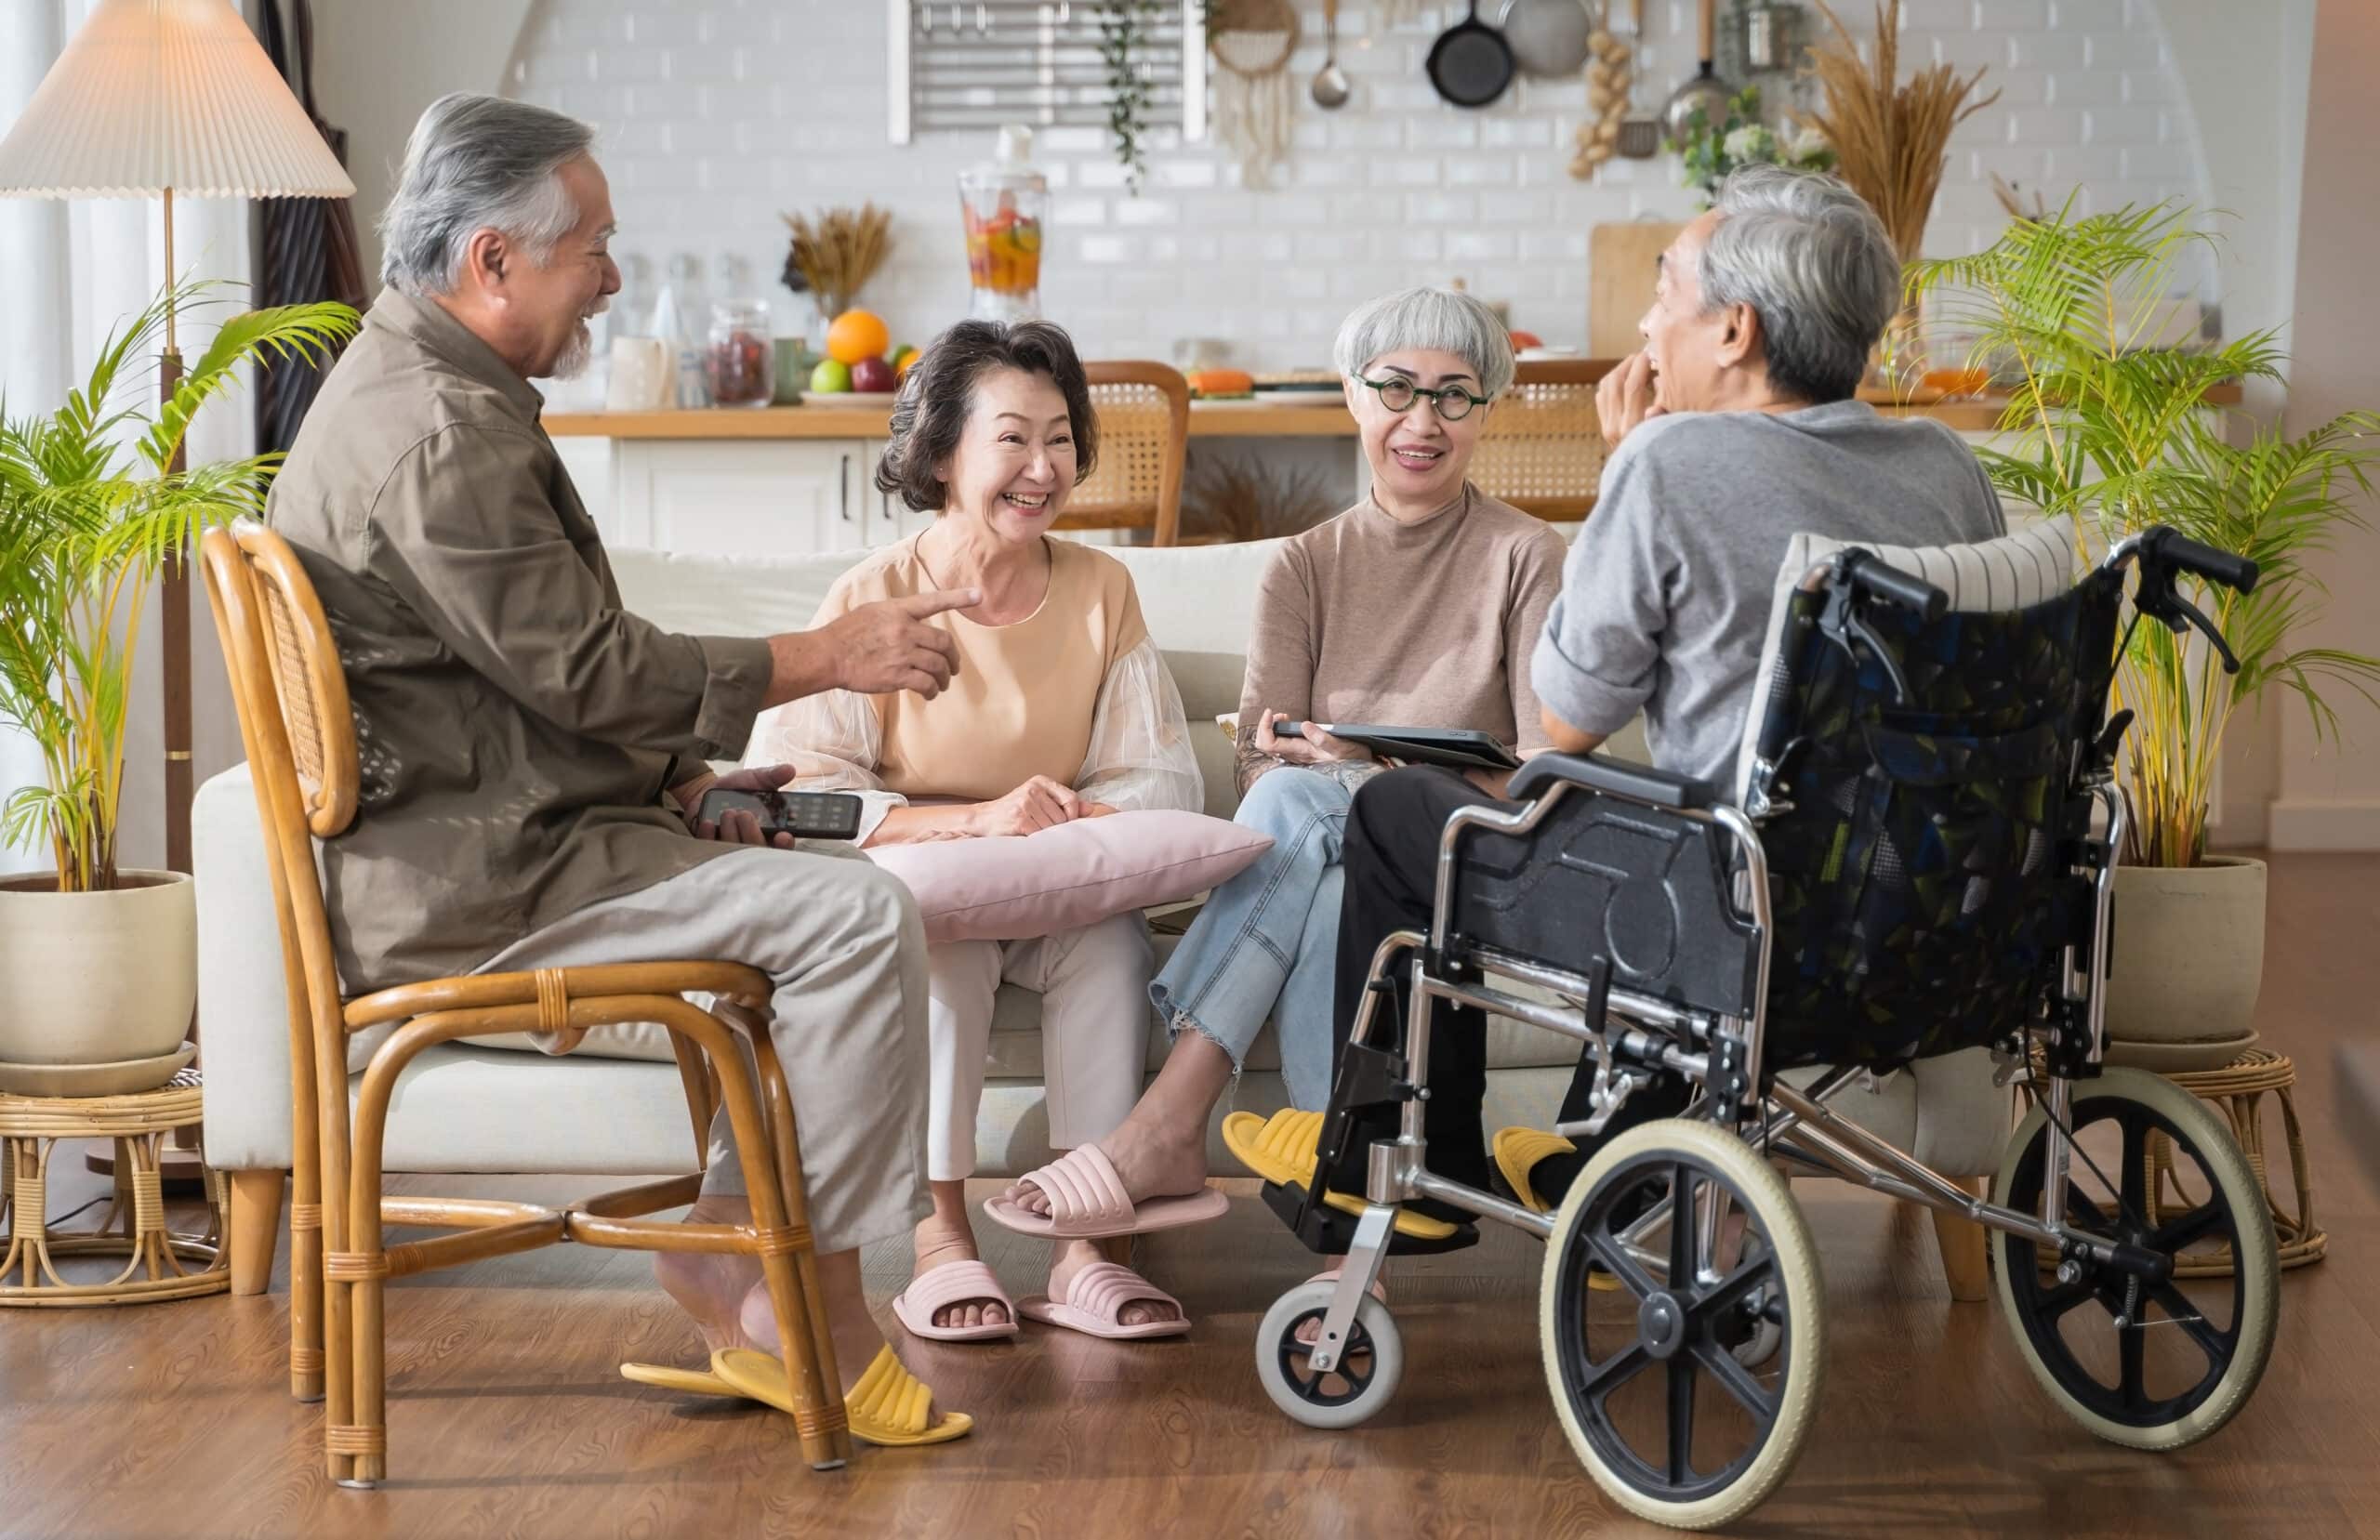 A group of elderly people sitting in a living room with a wheelchair.